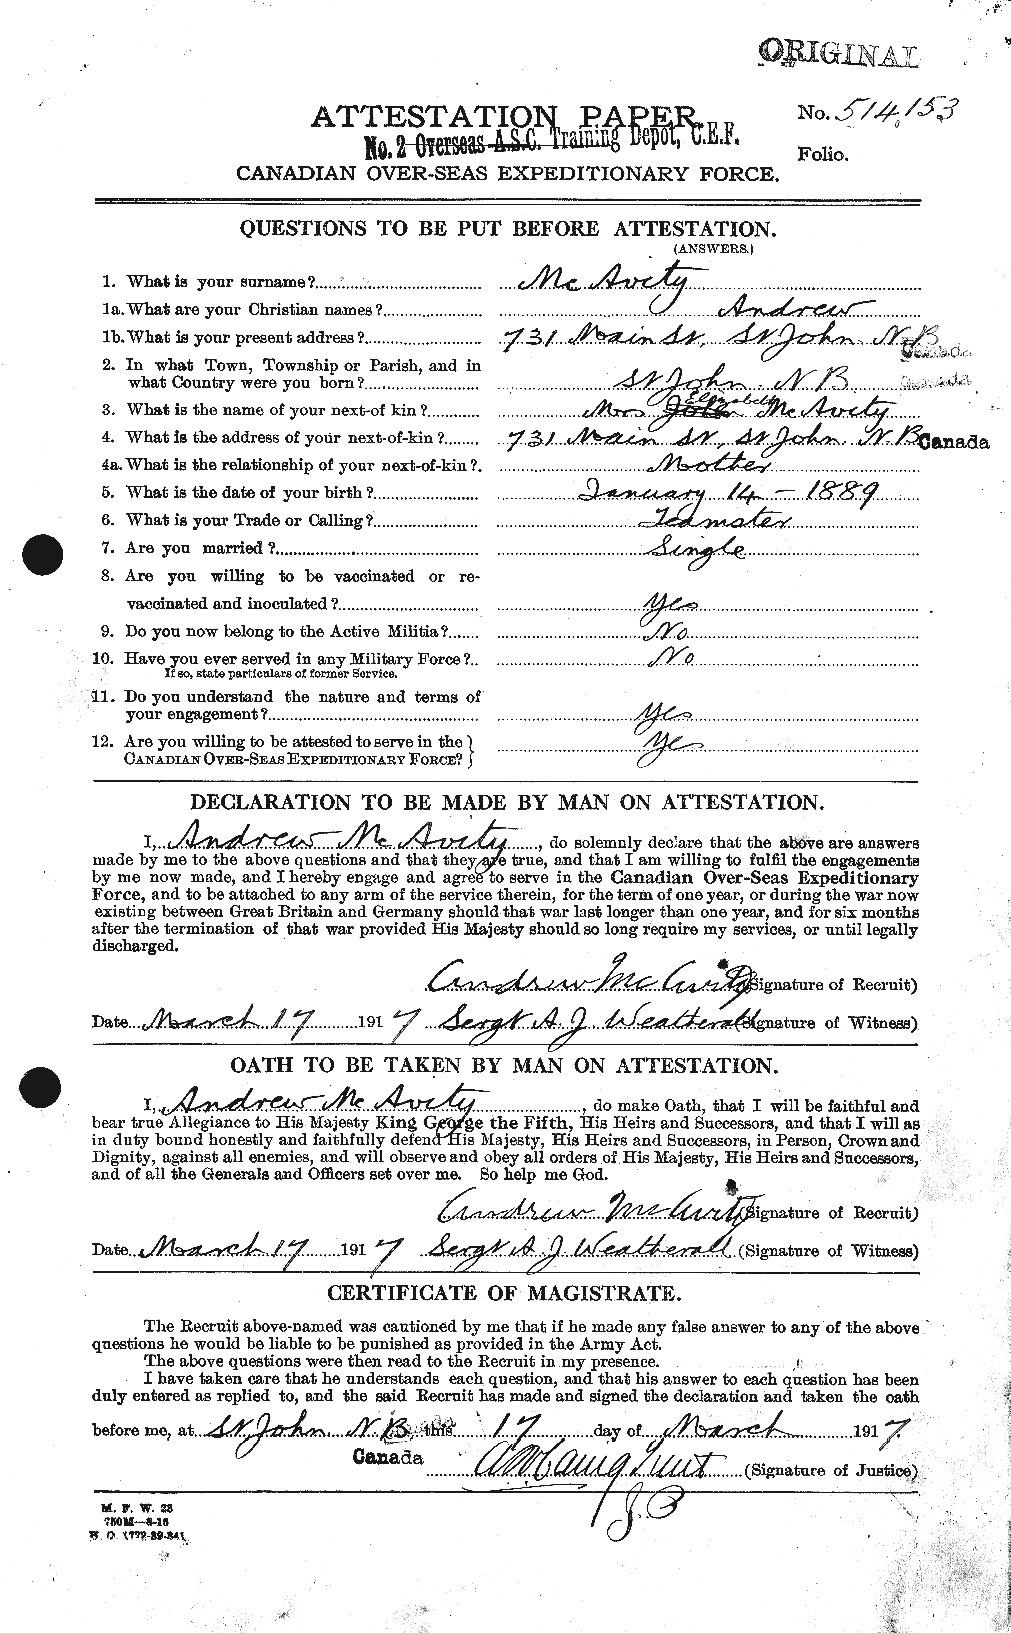 Personnel Records of the First World War - CEF 130046a